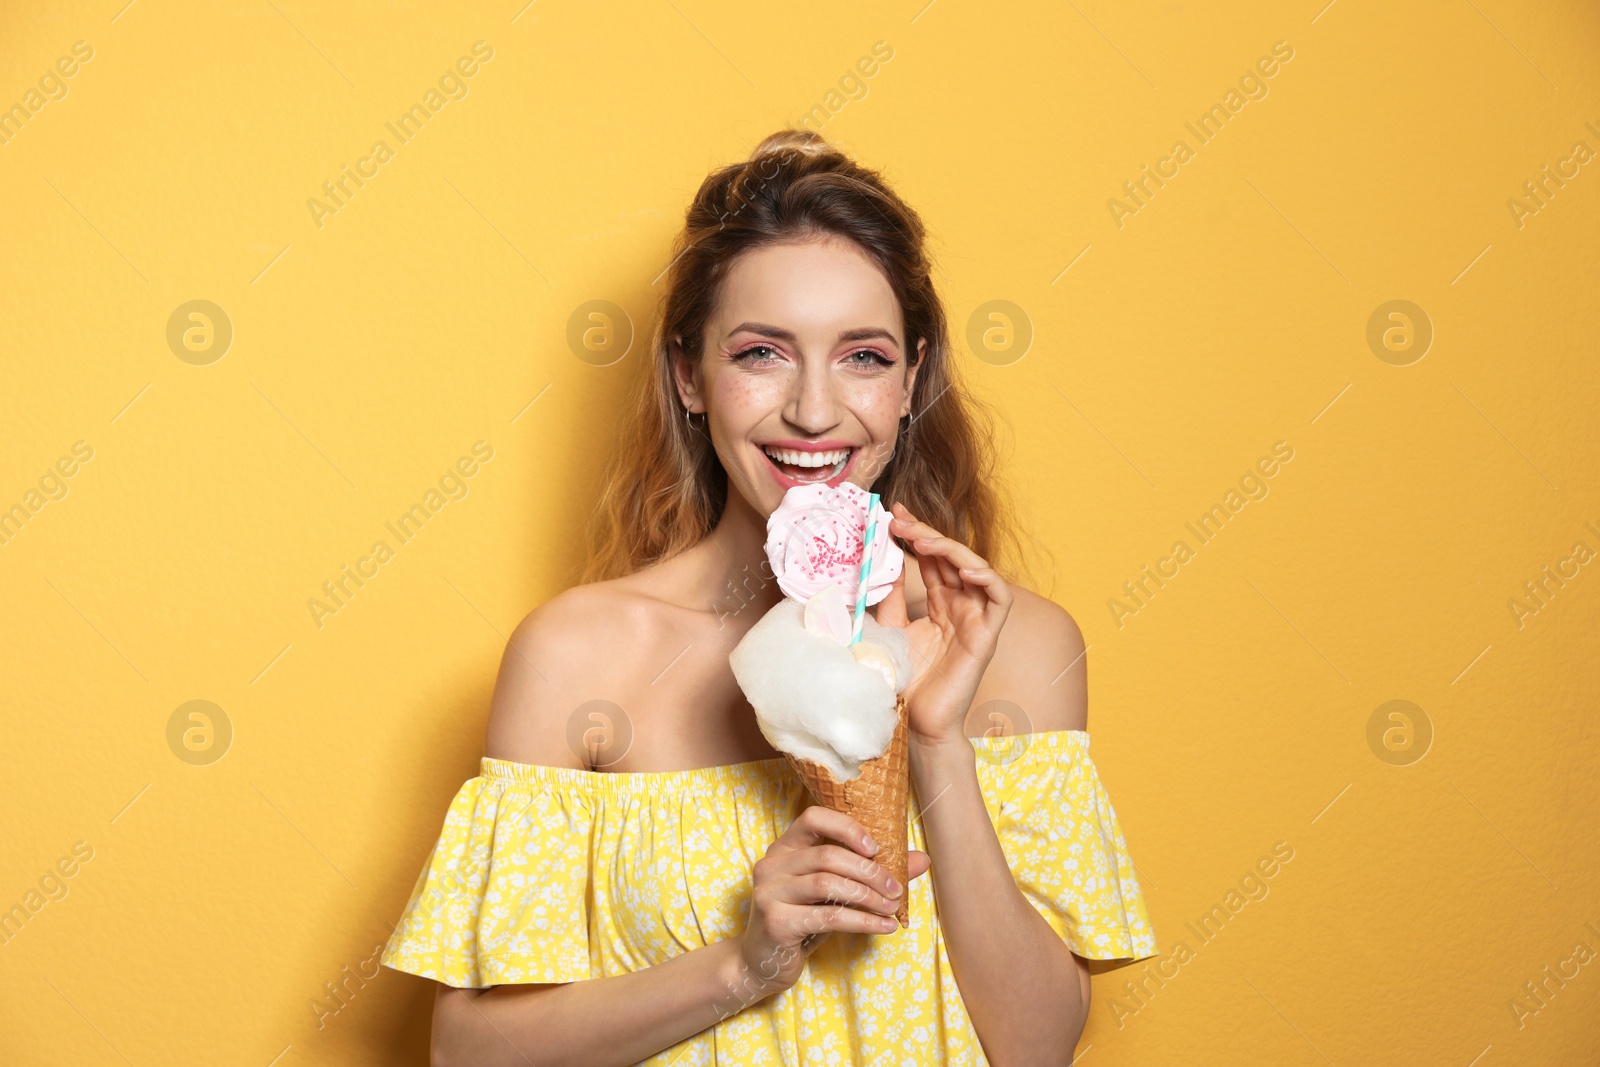 Photo of Portrait of young woman holding cotton candy dessert on yellow background